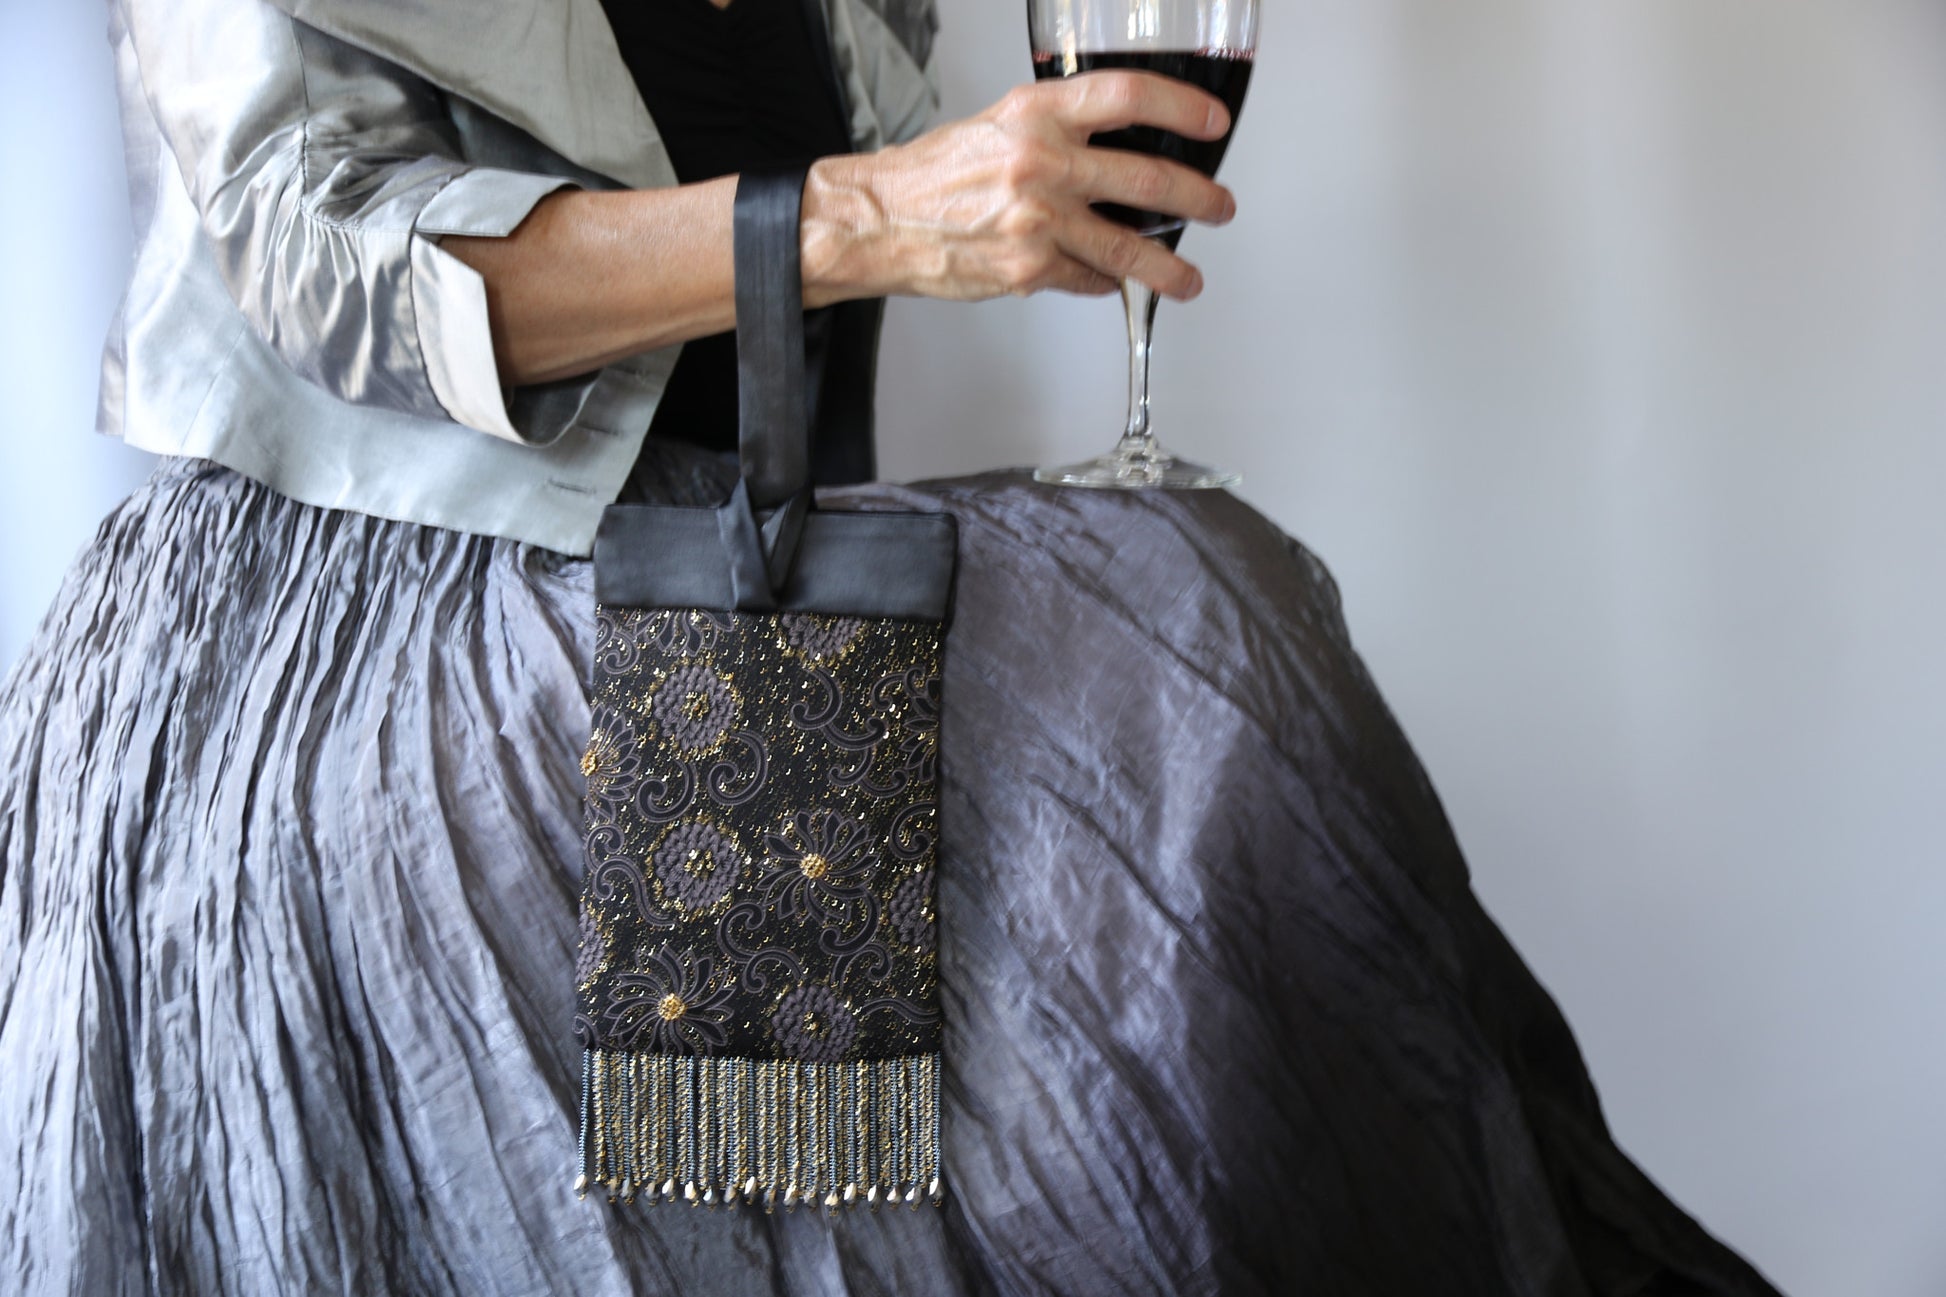 Black and Gold Evening Bag from Jenny Jag-Wear Design.  The photo shows the functionality of this compact evening bag. The model is wearing the purse on her wrist and holding a glass of wine in the same hand. The Zara Collection from Jenny Jag-Wear Design. 